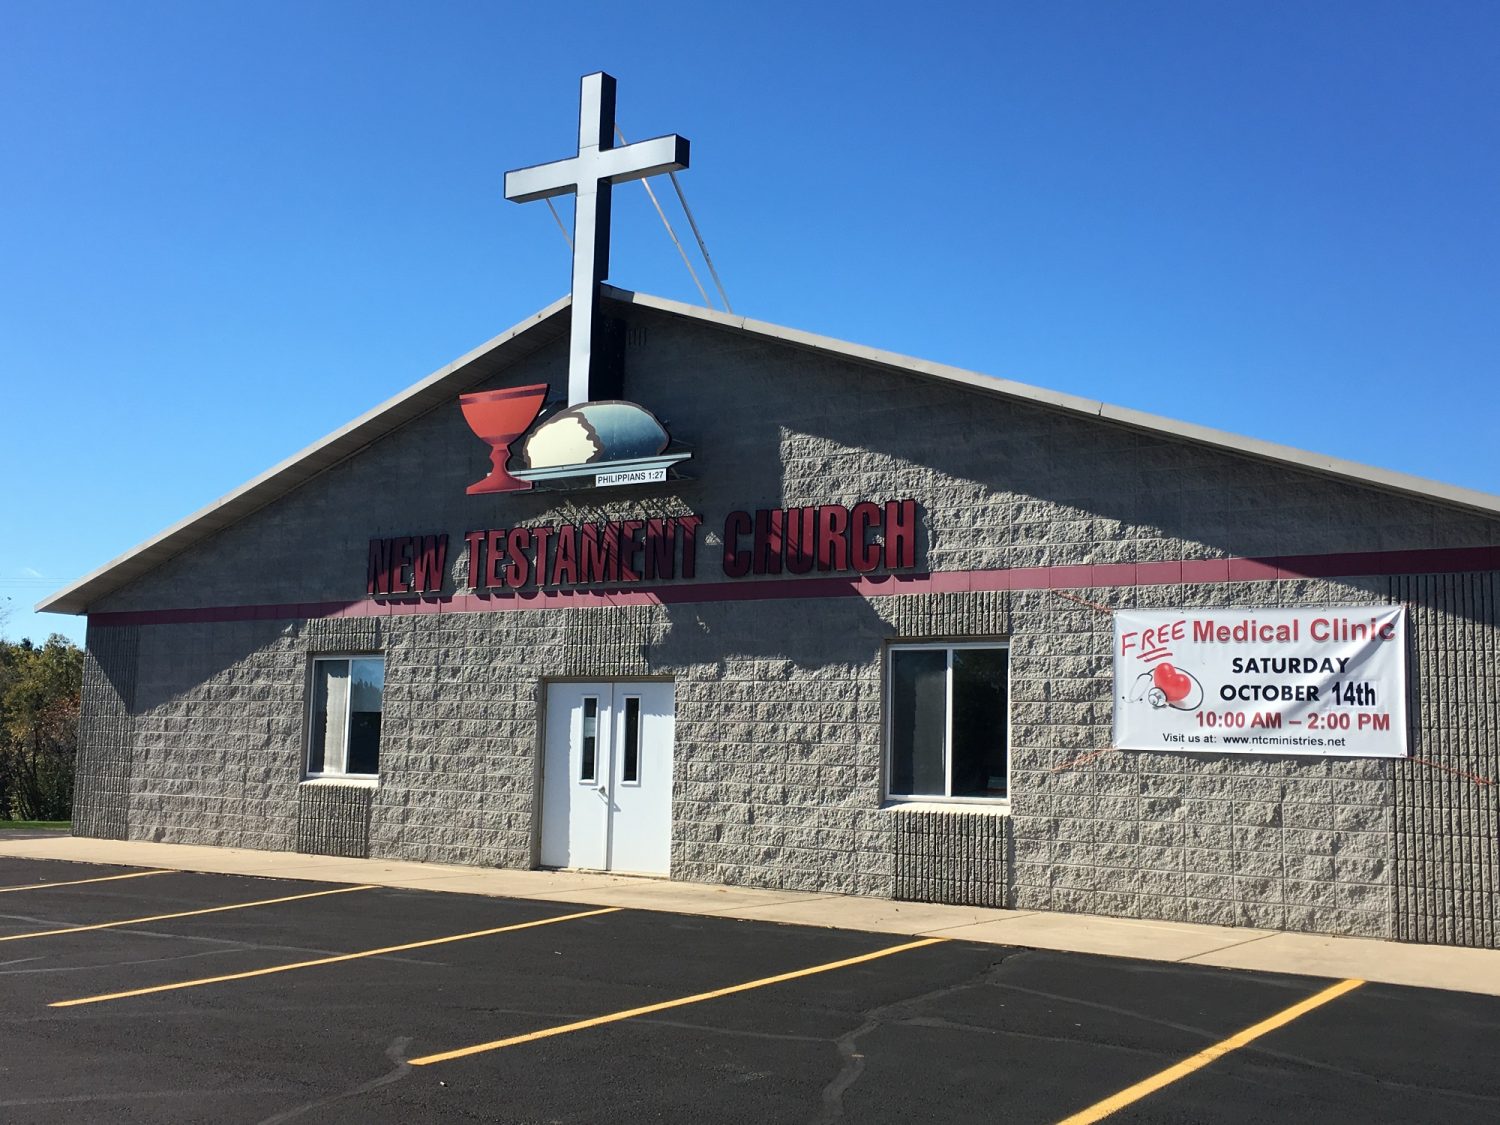 New Testament Church to host Free Medical Clinic